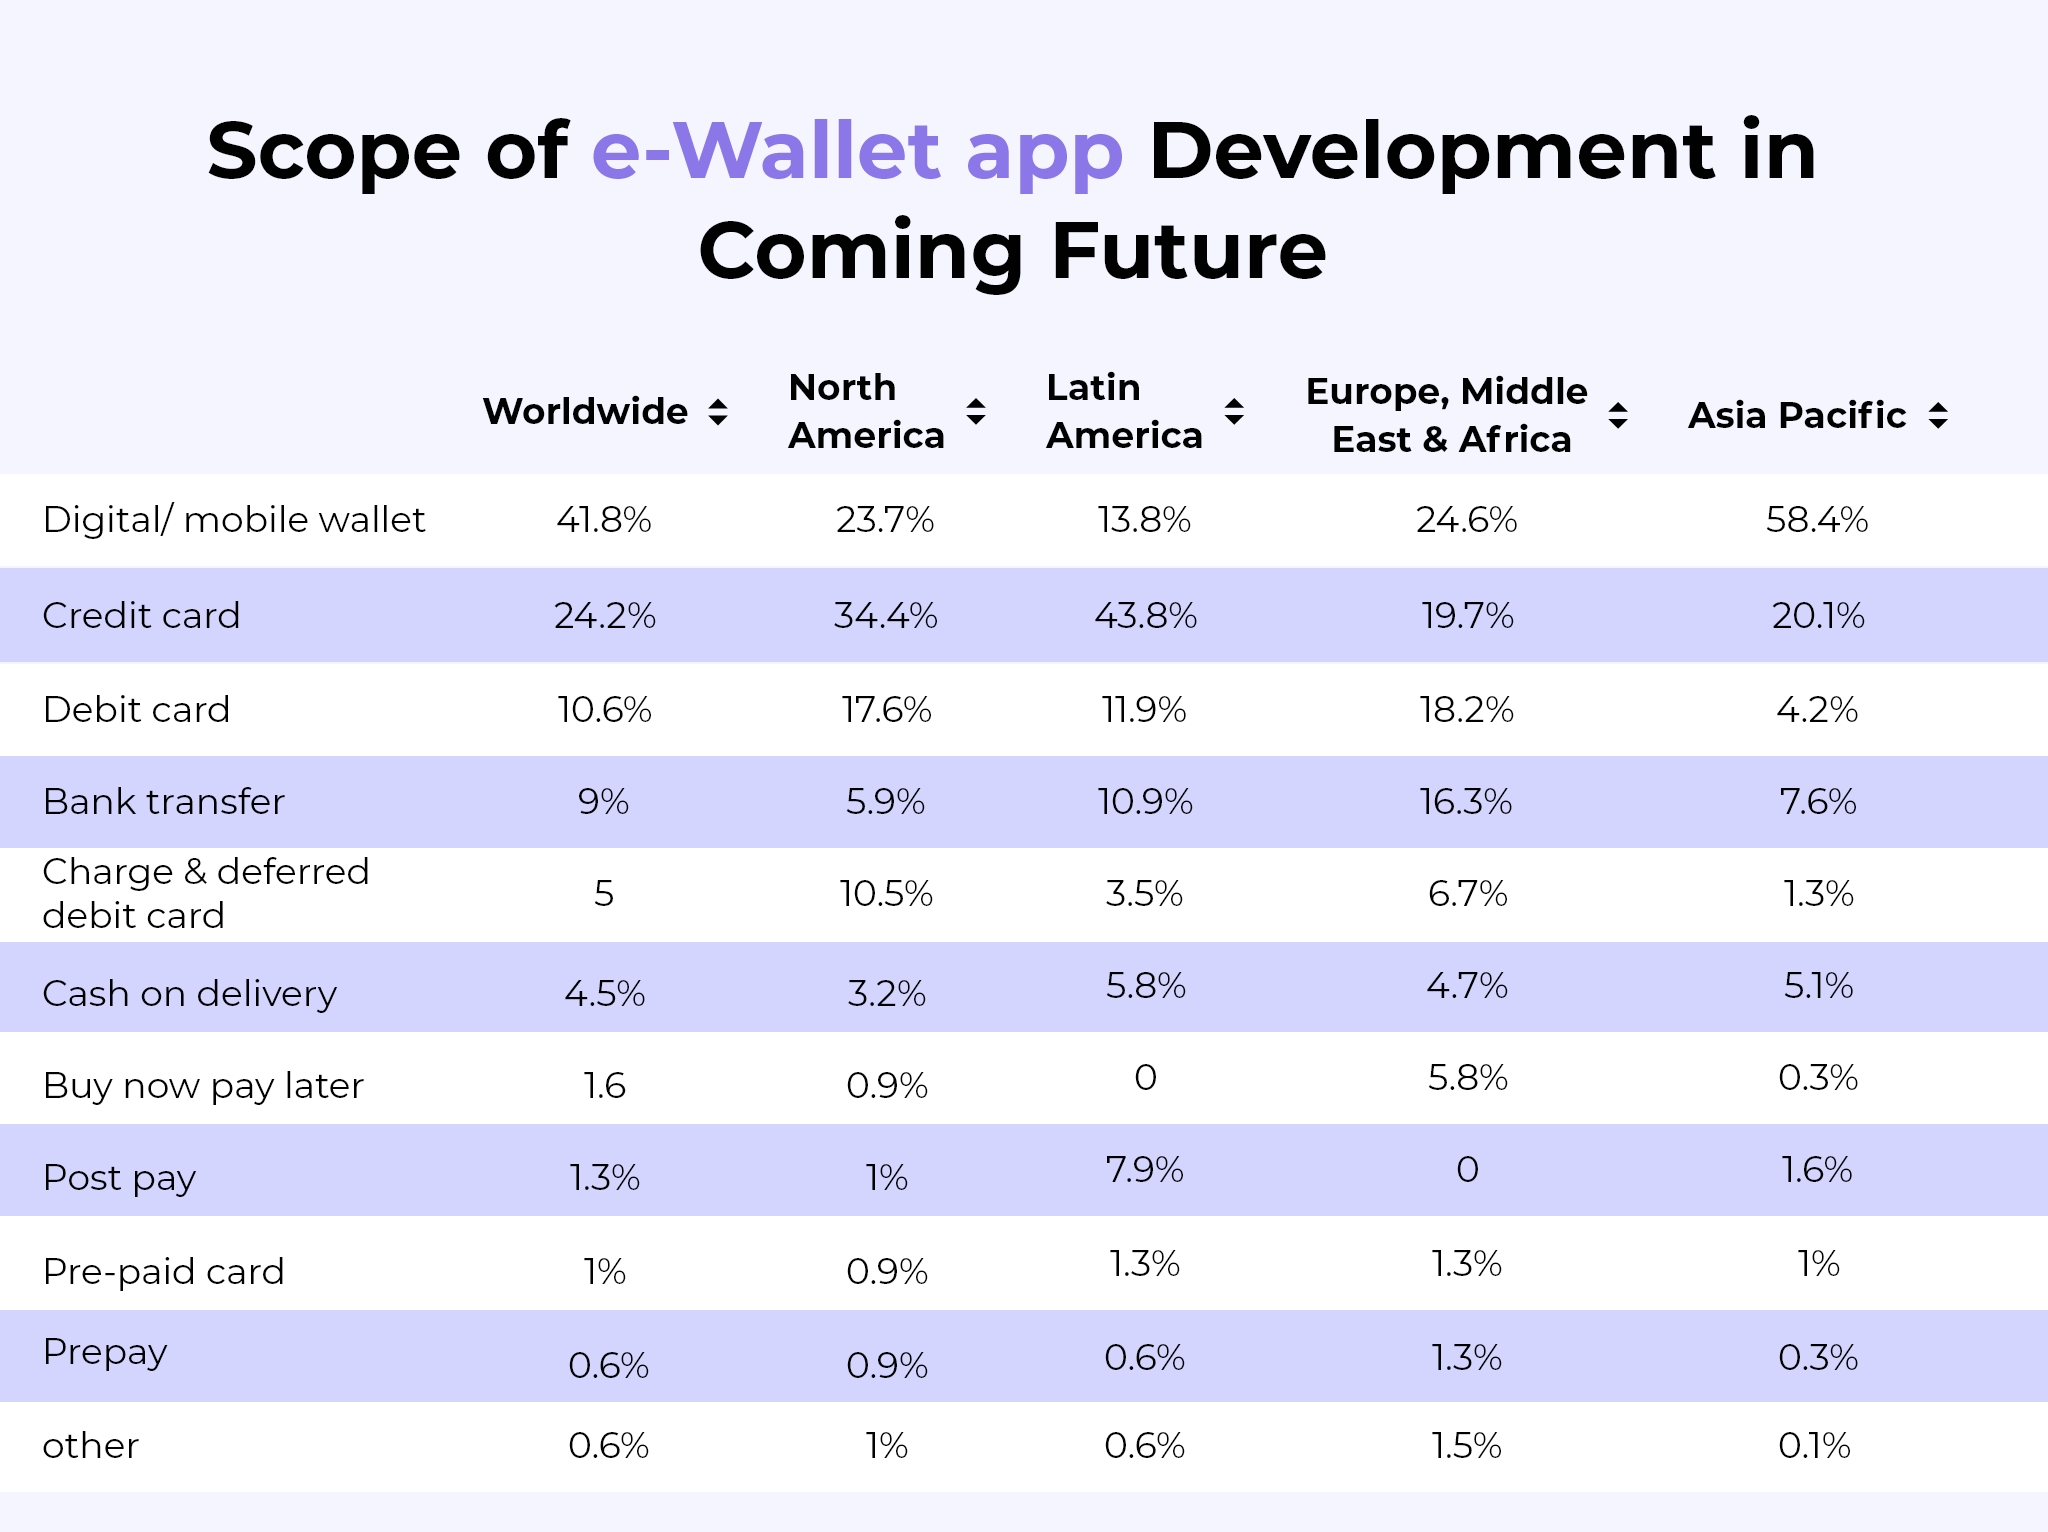 Scope of e-Wallet app in the future